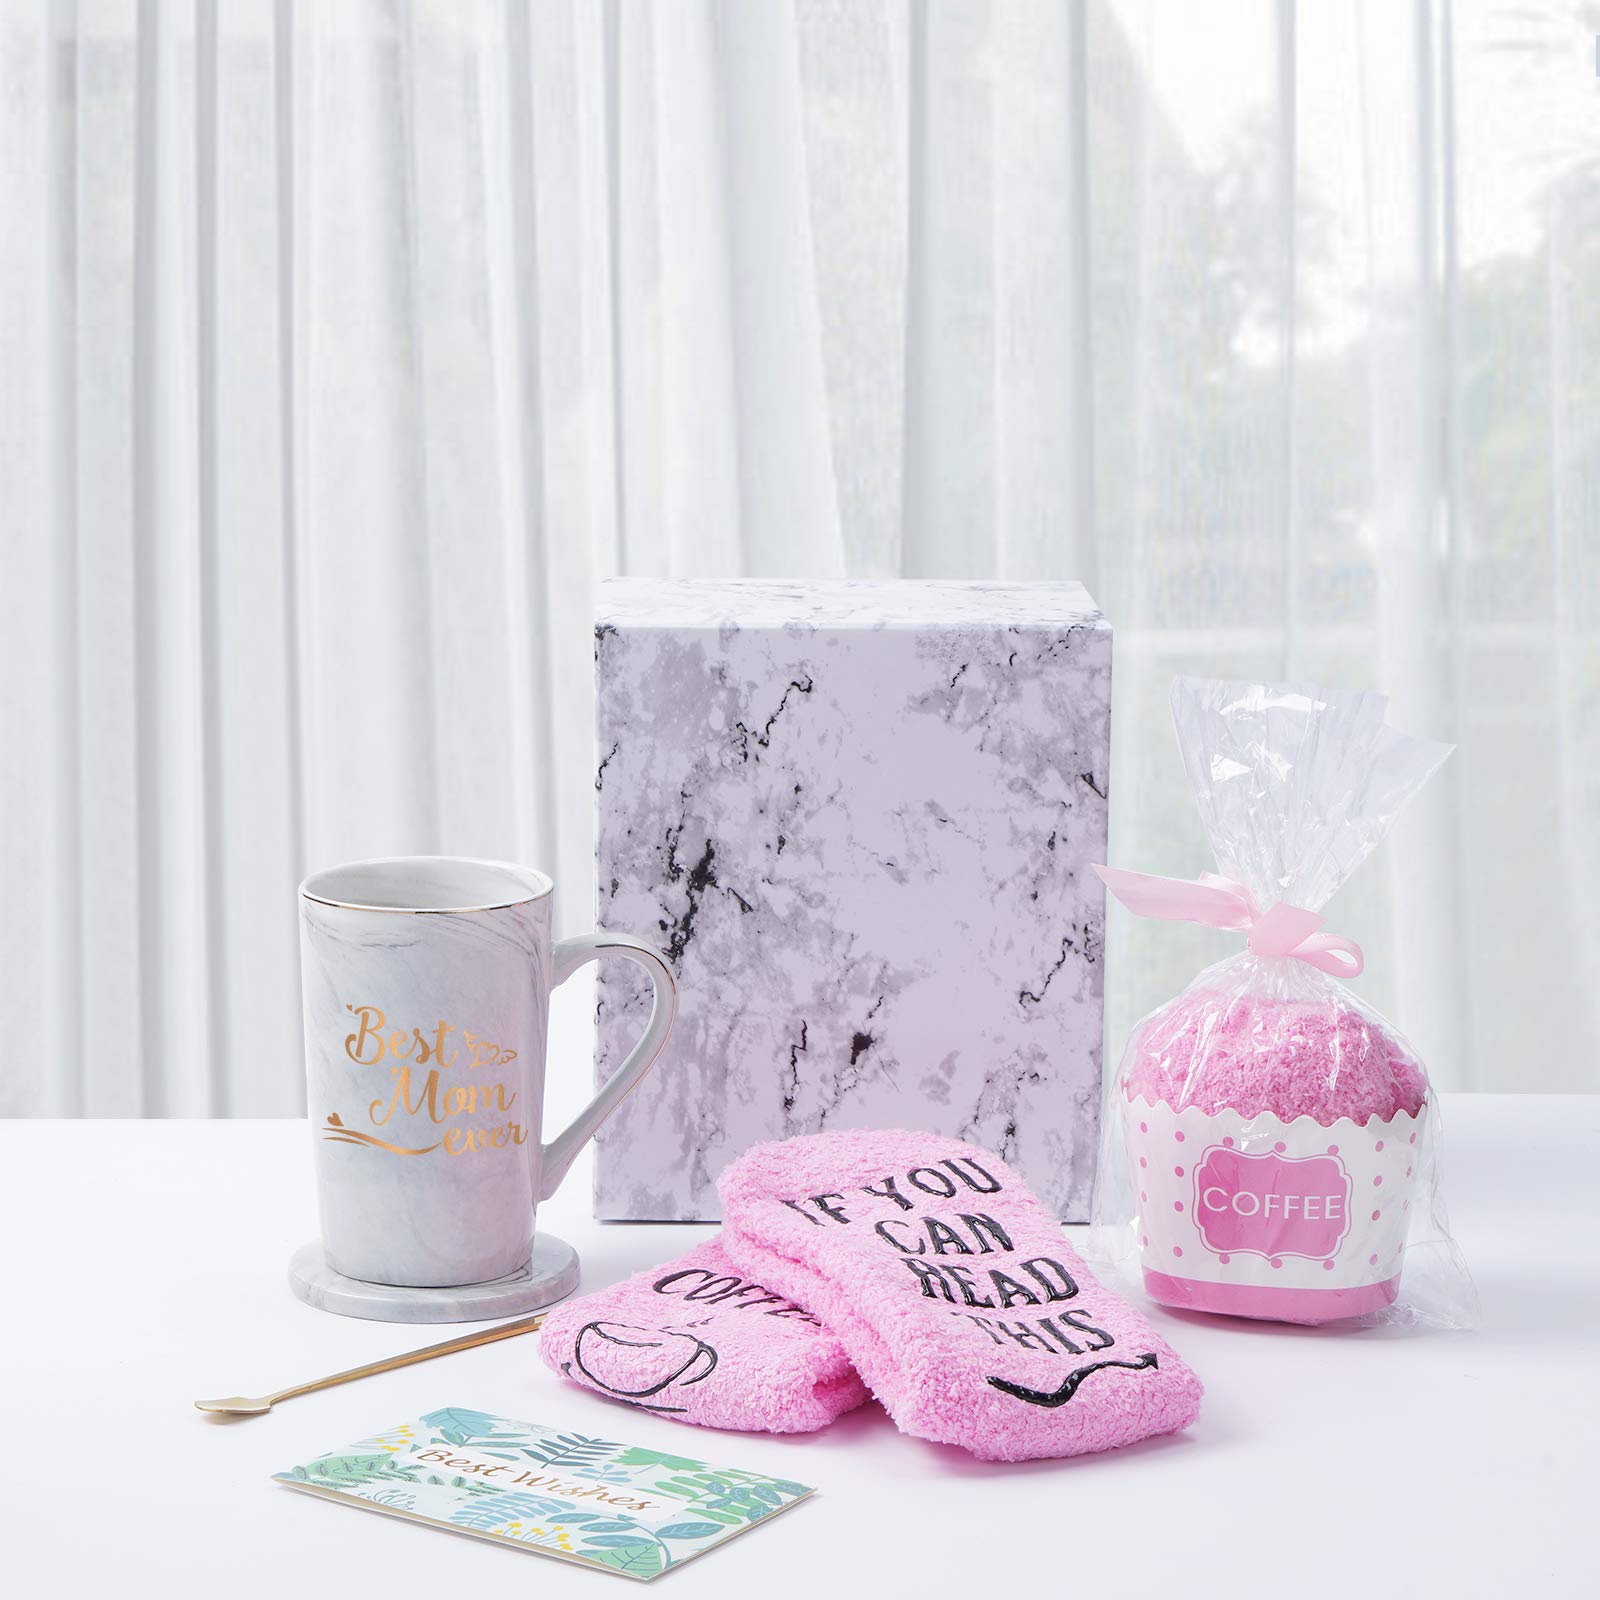 YHRJWN Best Mom Ever Coffee Mug for Mom Mother Mothers Day Mom Mug from Daughter Son Mom Coffee Mug 14Oz Gray Marble Mug with Exquisite Box Spoon Coaster Sock Gift Card